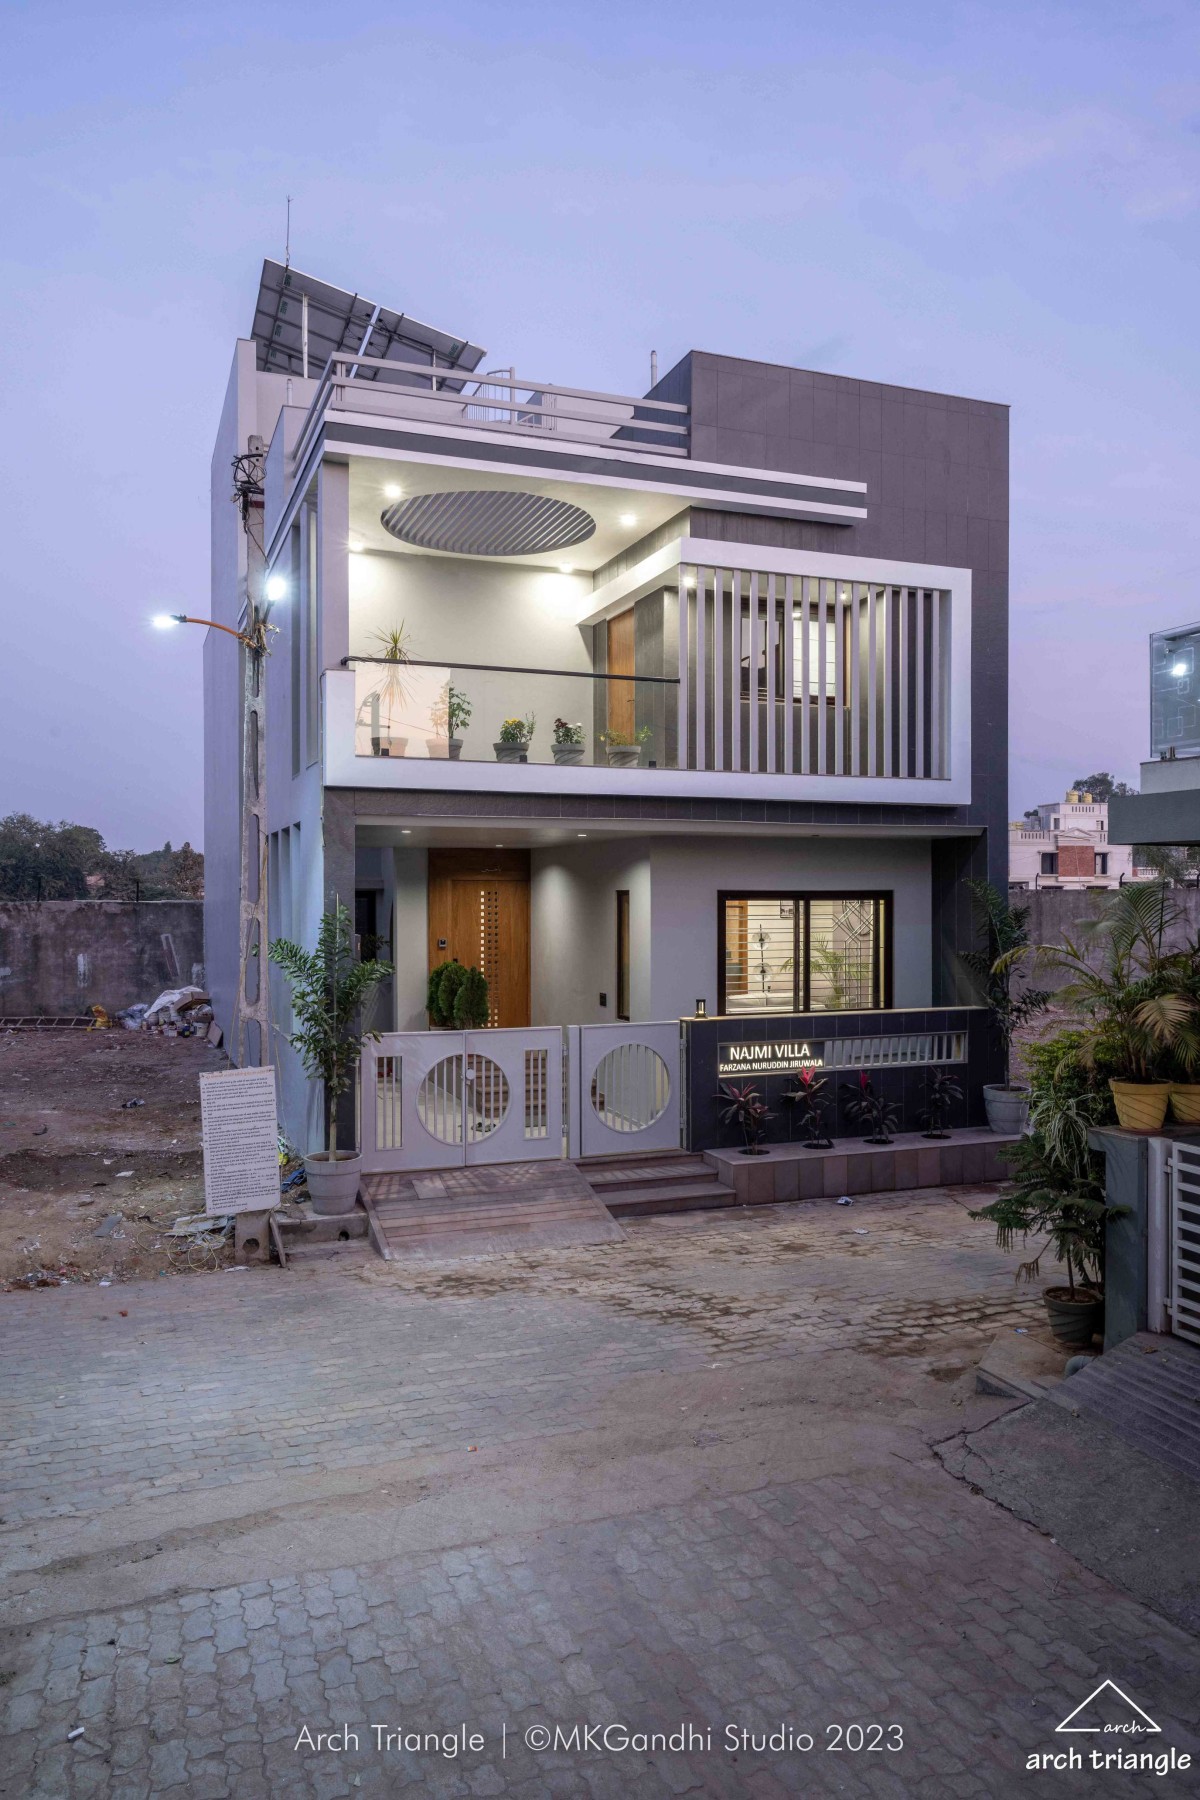 Dusk light exterior view of Jiruwala Residence by Arch Triangle